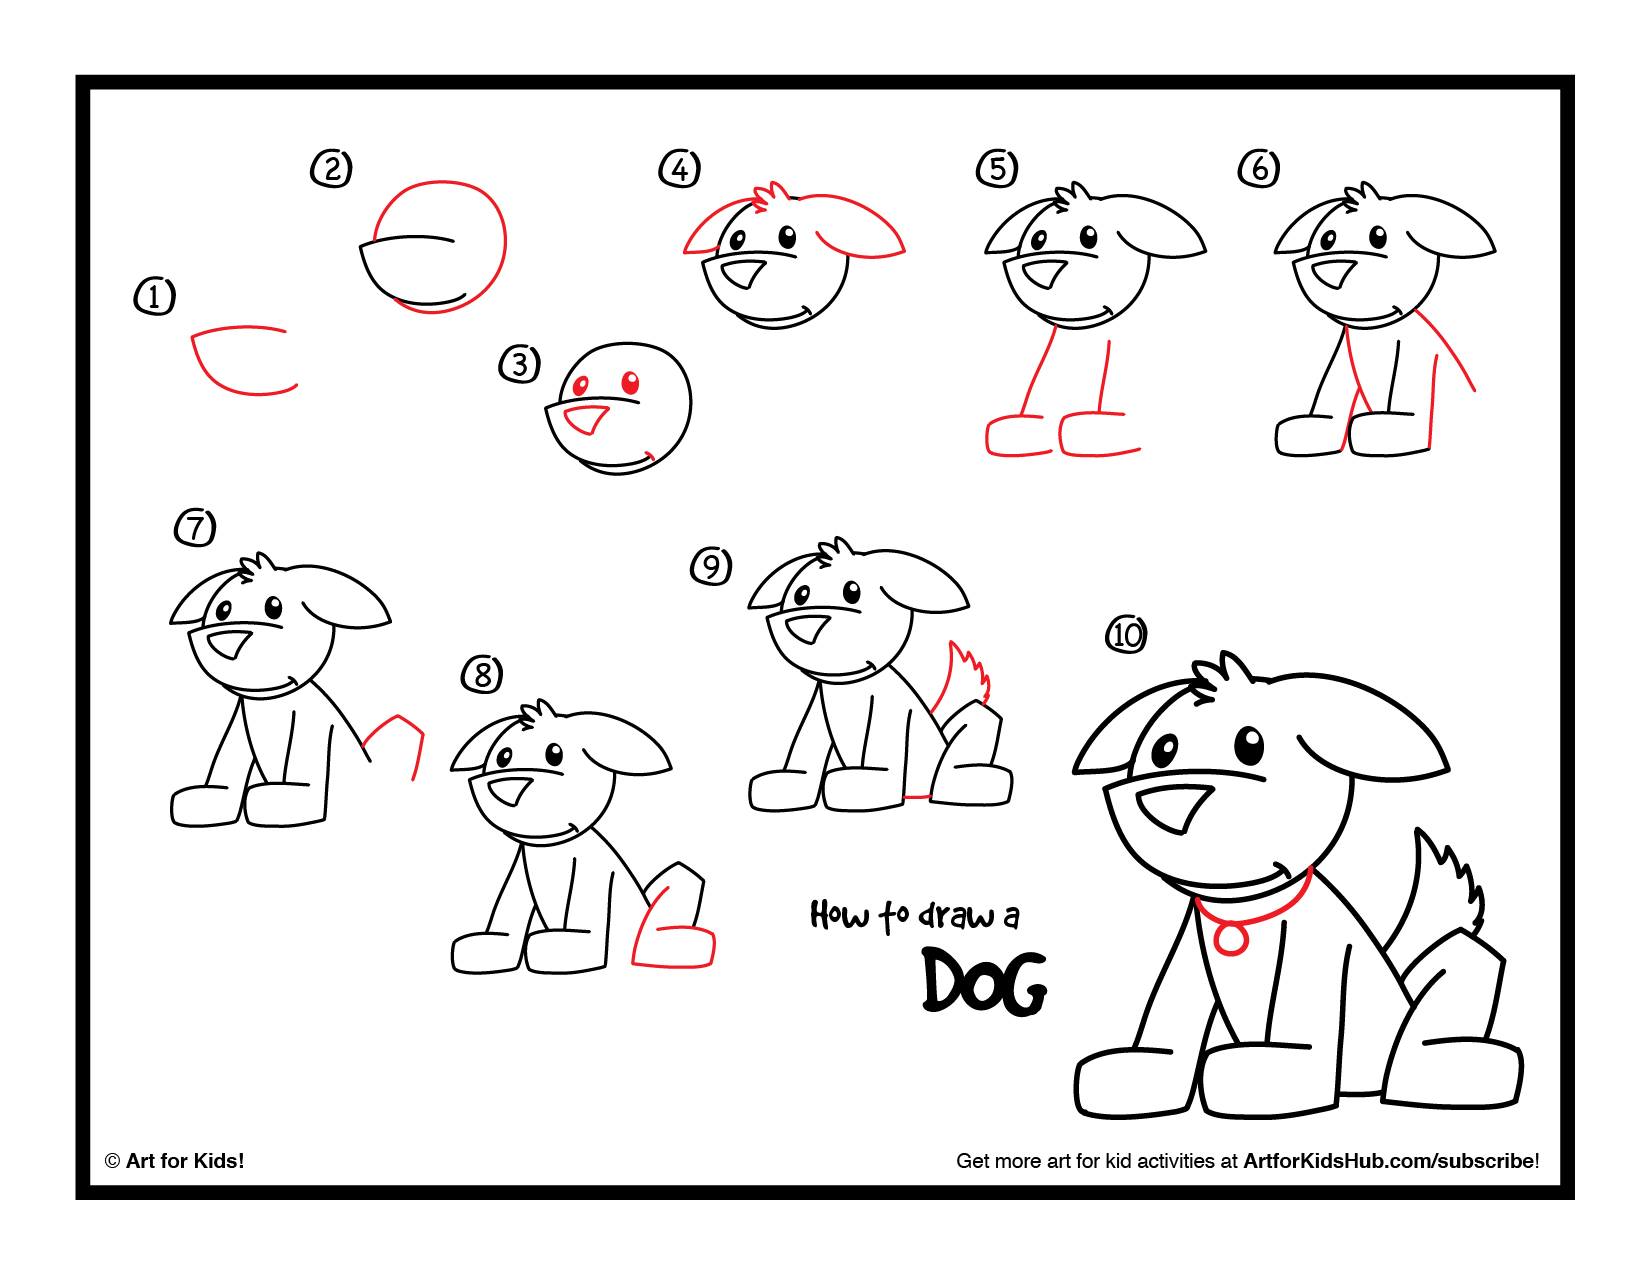 How To Draw A Dog - Art for Kids Hub